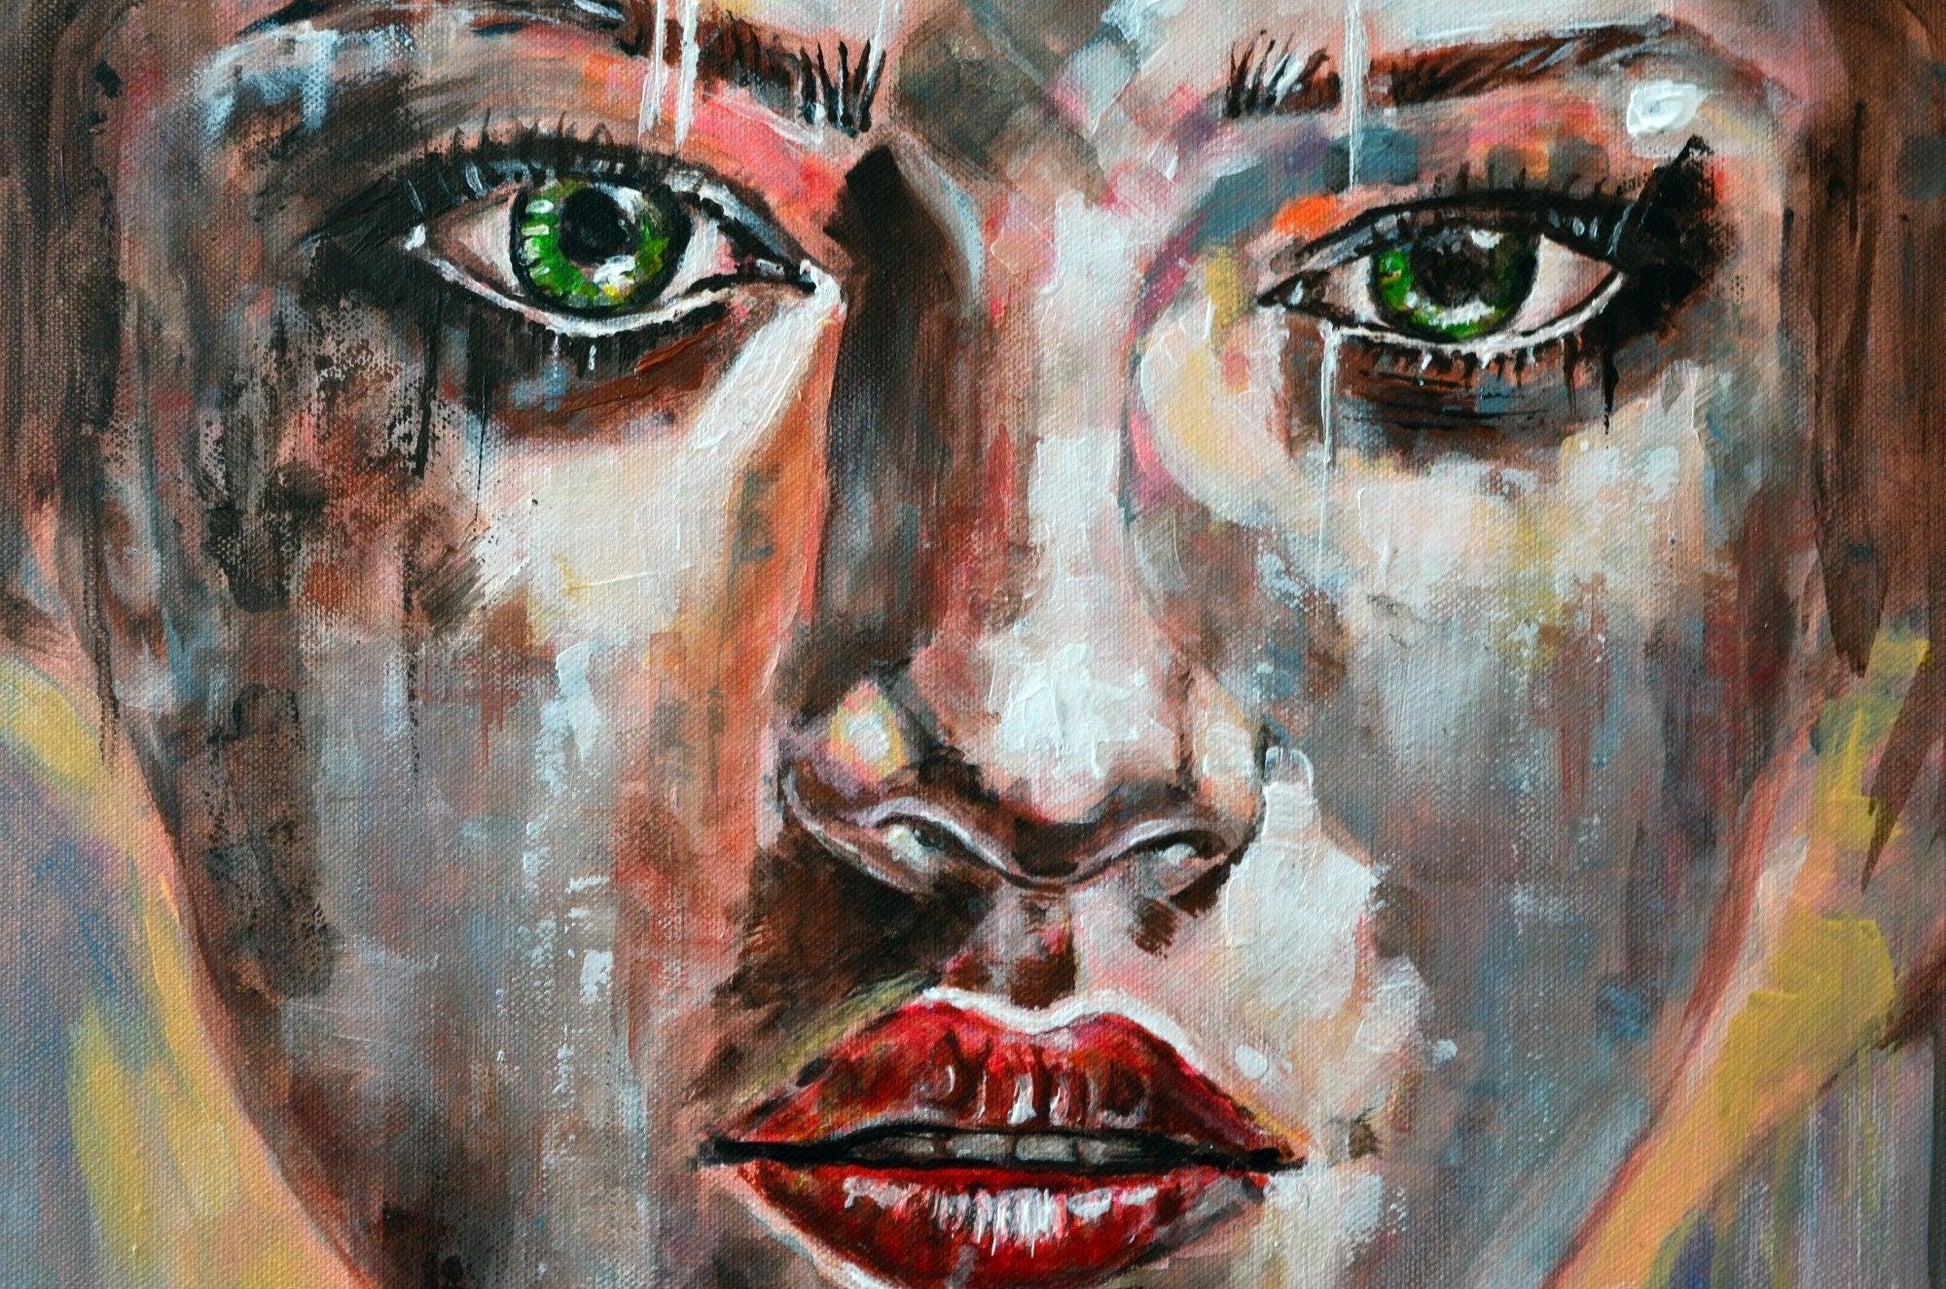 Dynamic brush strokes and vibrant colors in 'Shining,' a modern abstract portrait by Misty Lady.